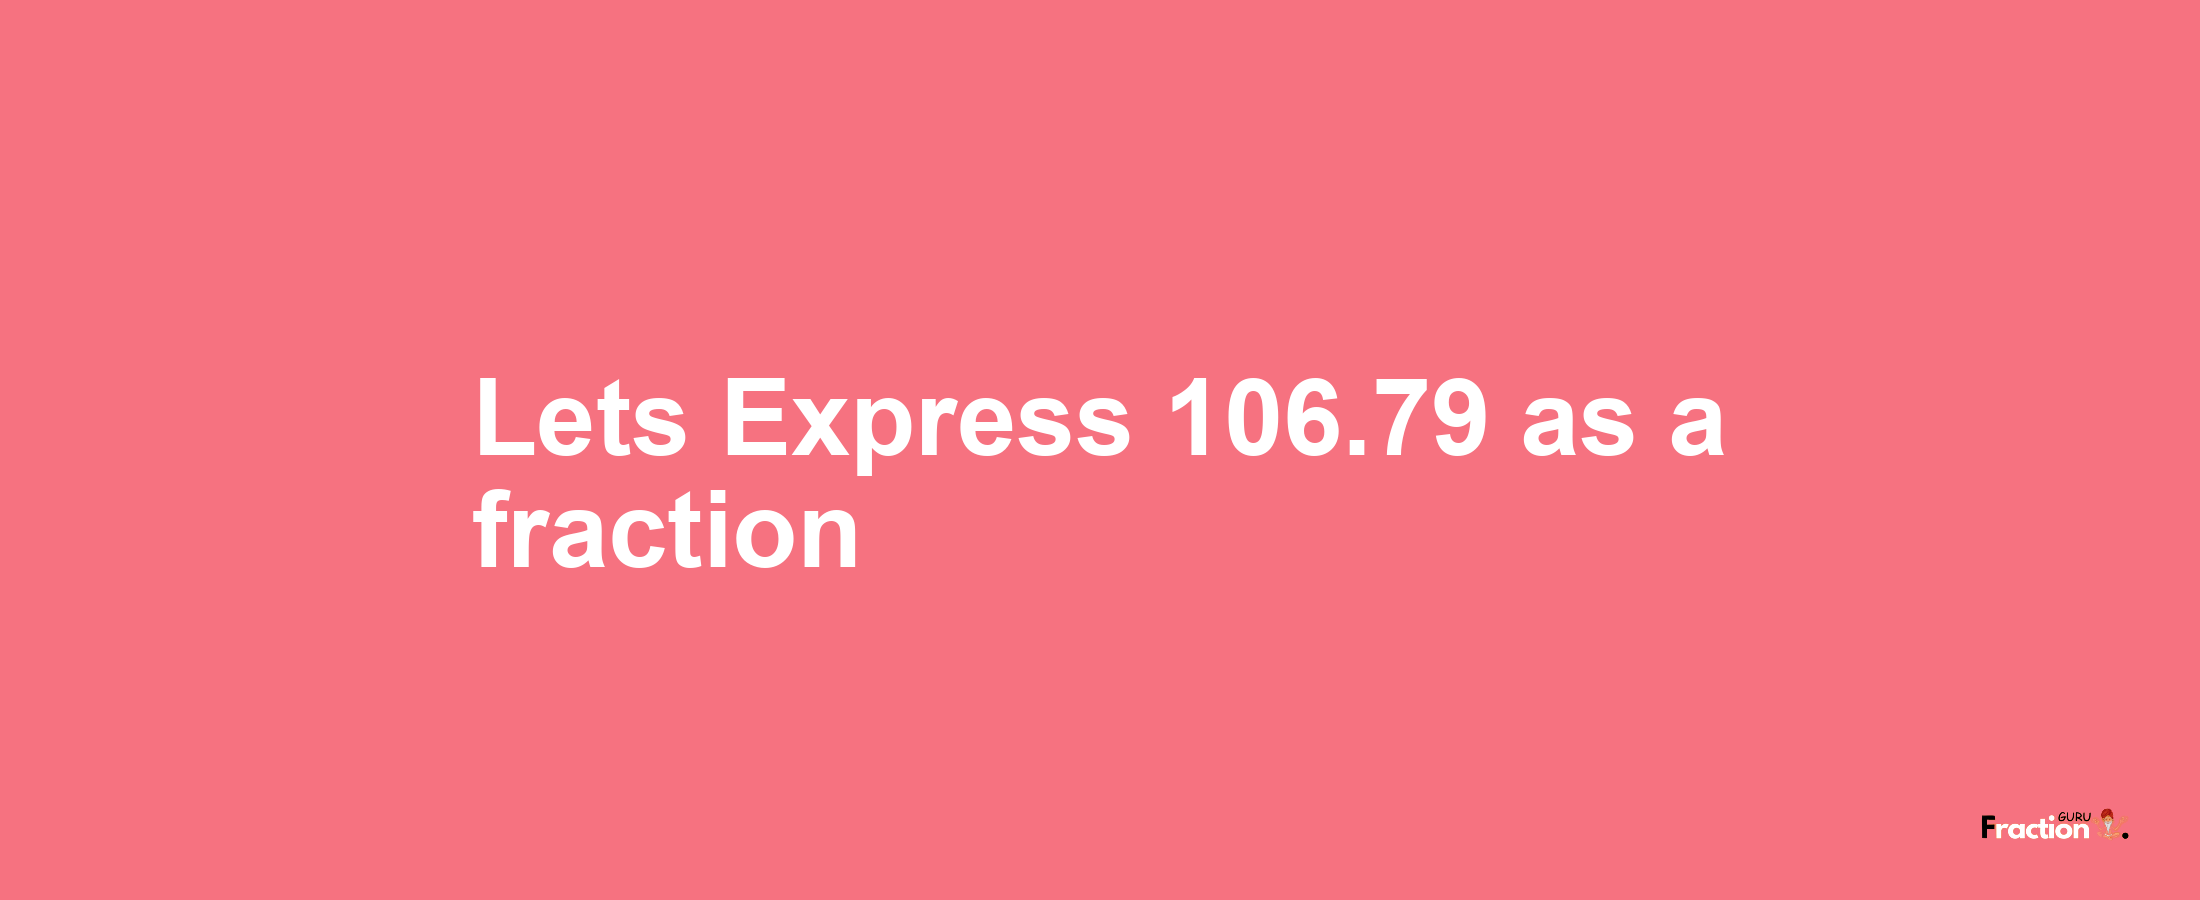 Lets Express 106.79 as afraction